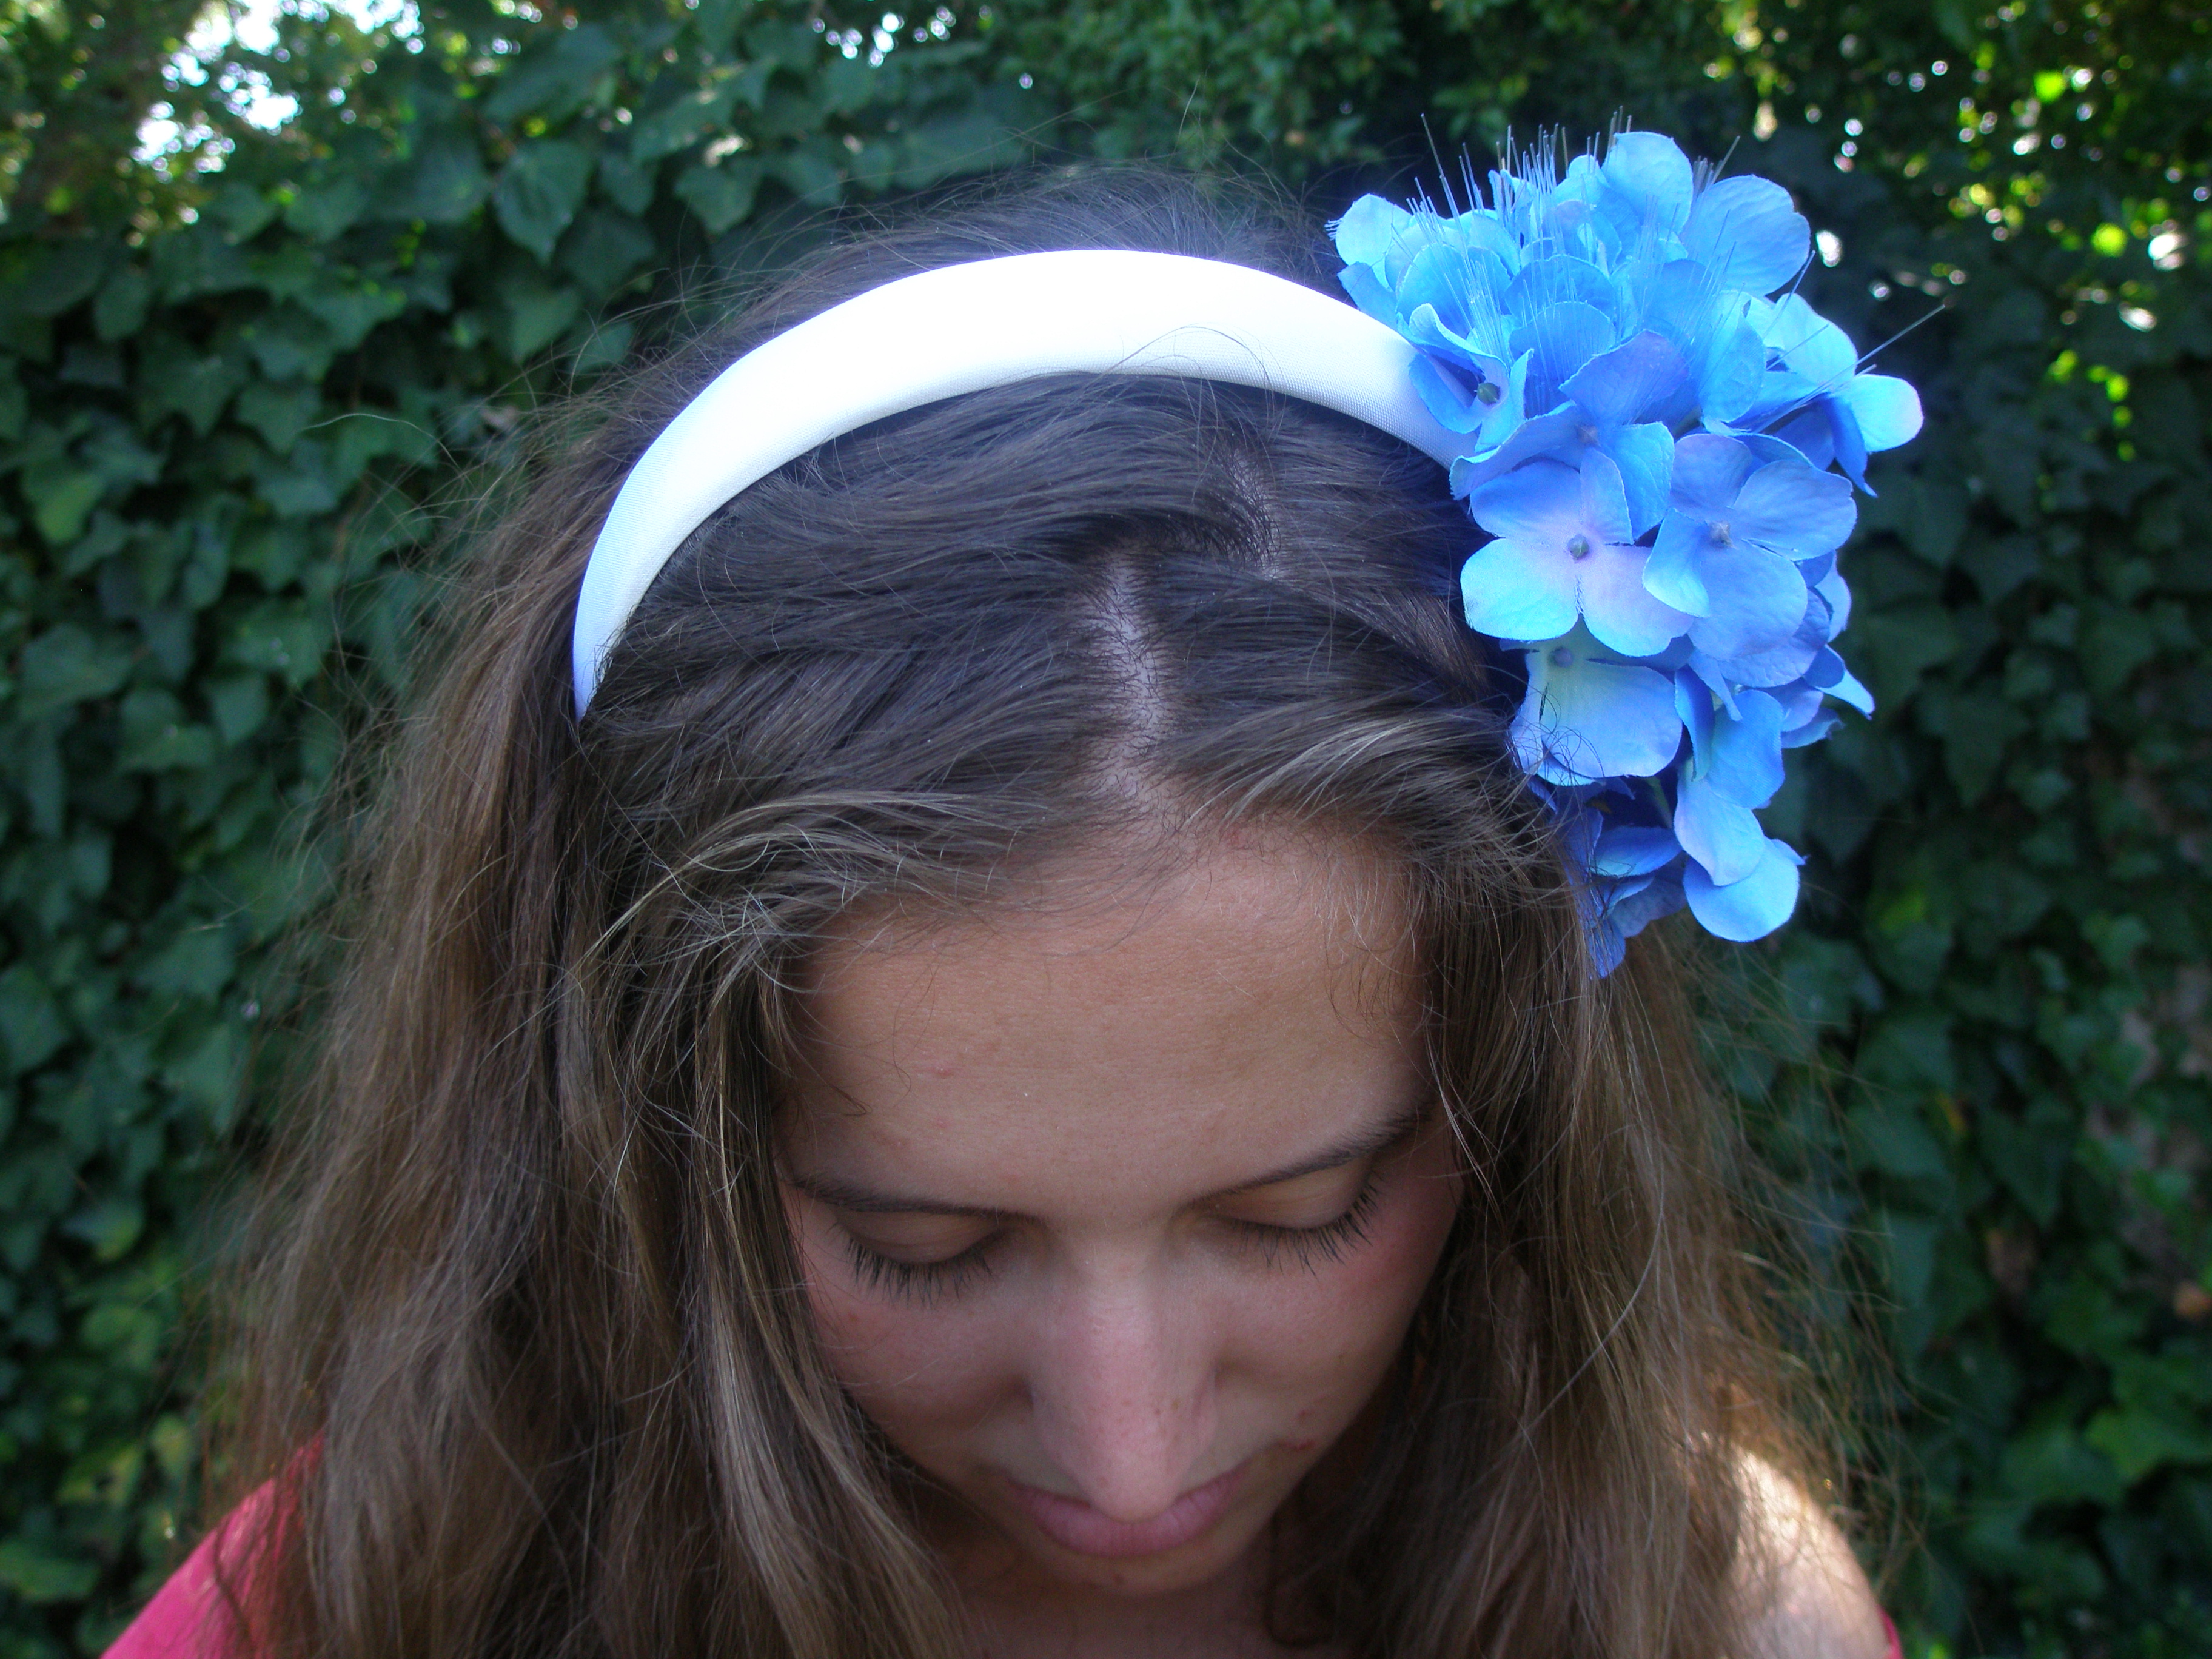 How to make a glowing flower headband